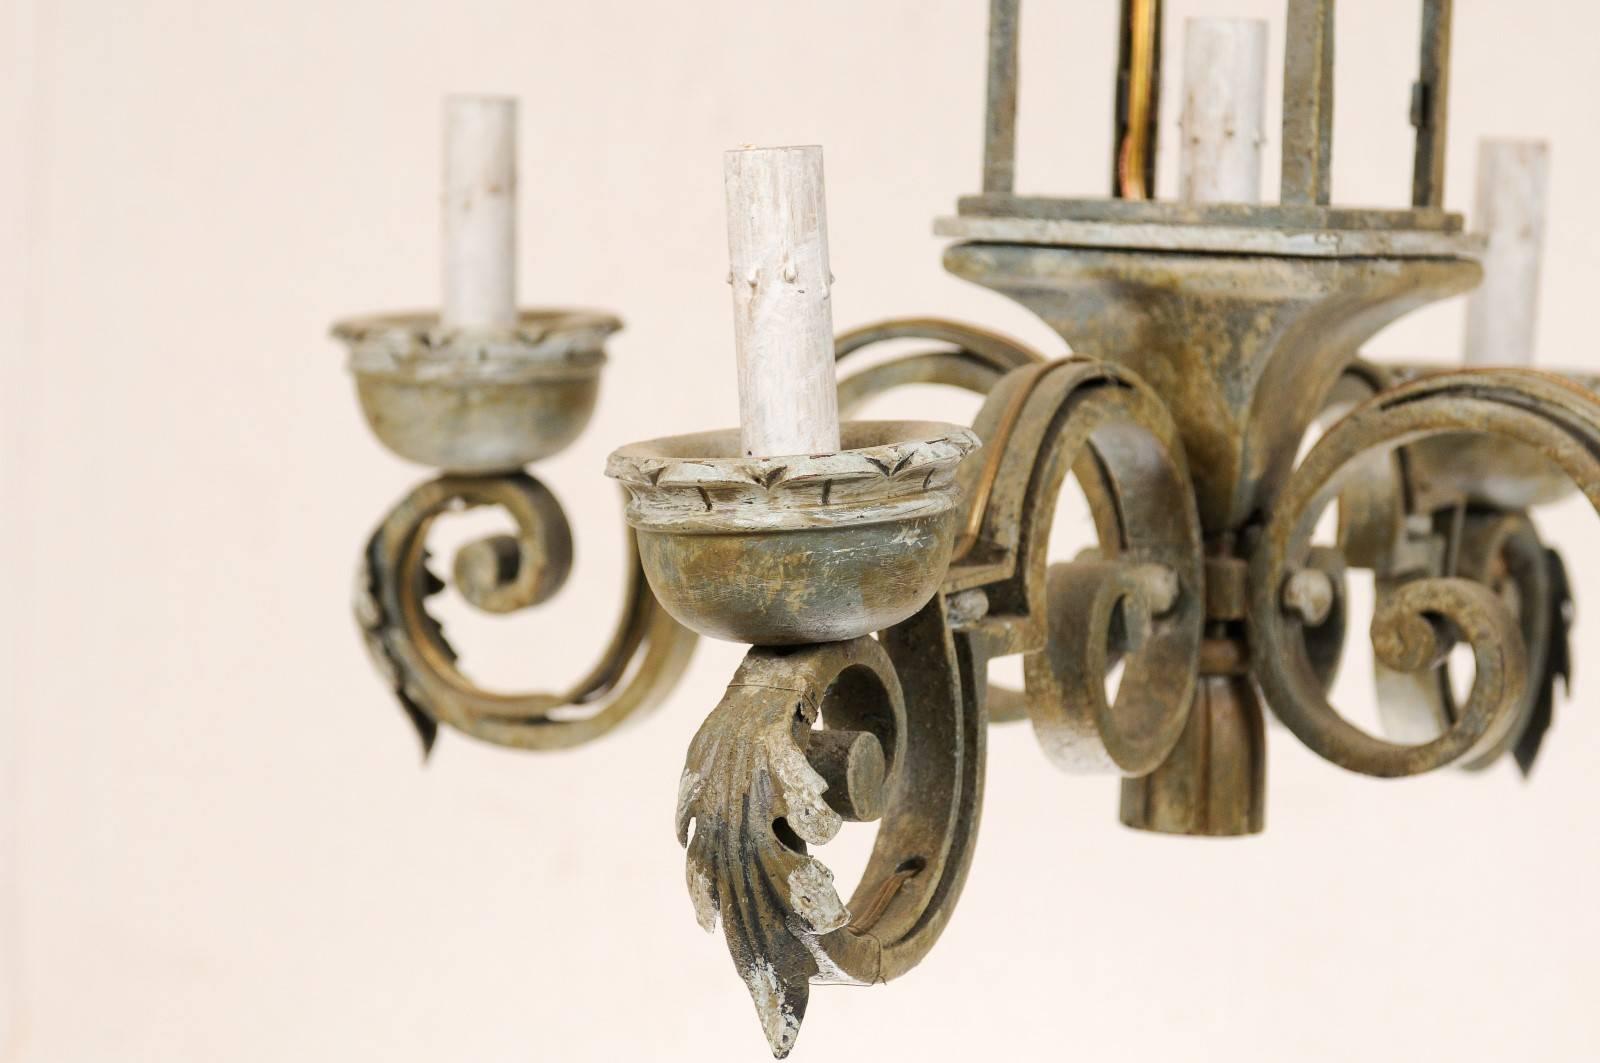 Italian Chandelier with Regal Crown at the Top, Hand-Forged Iron & Painted Wood 2